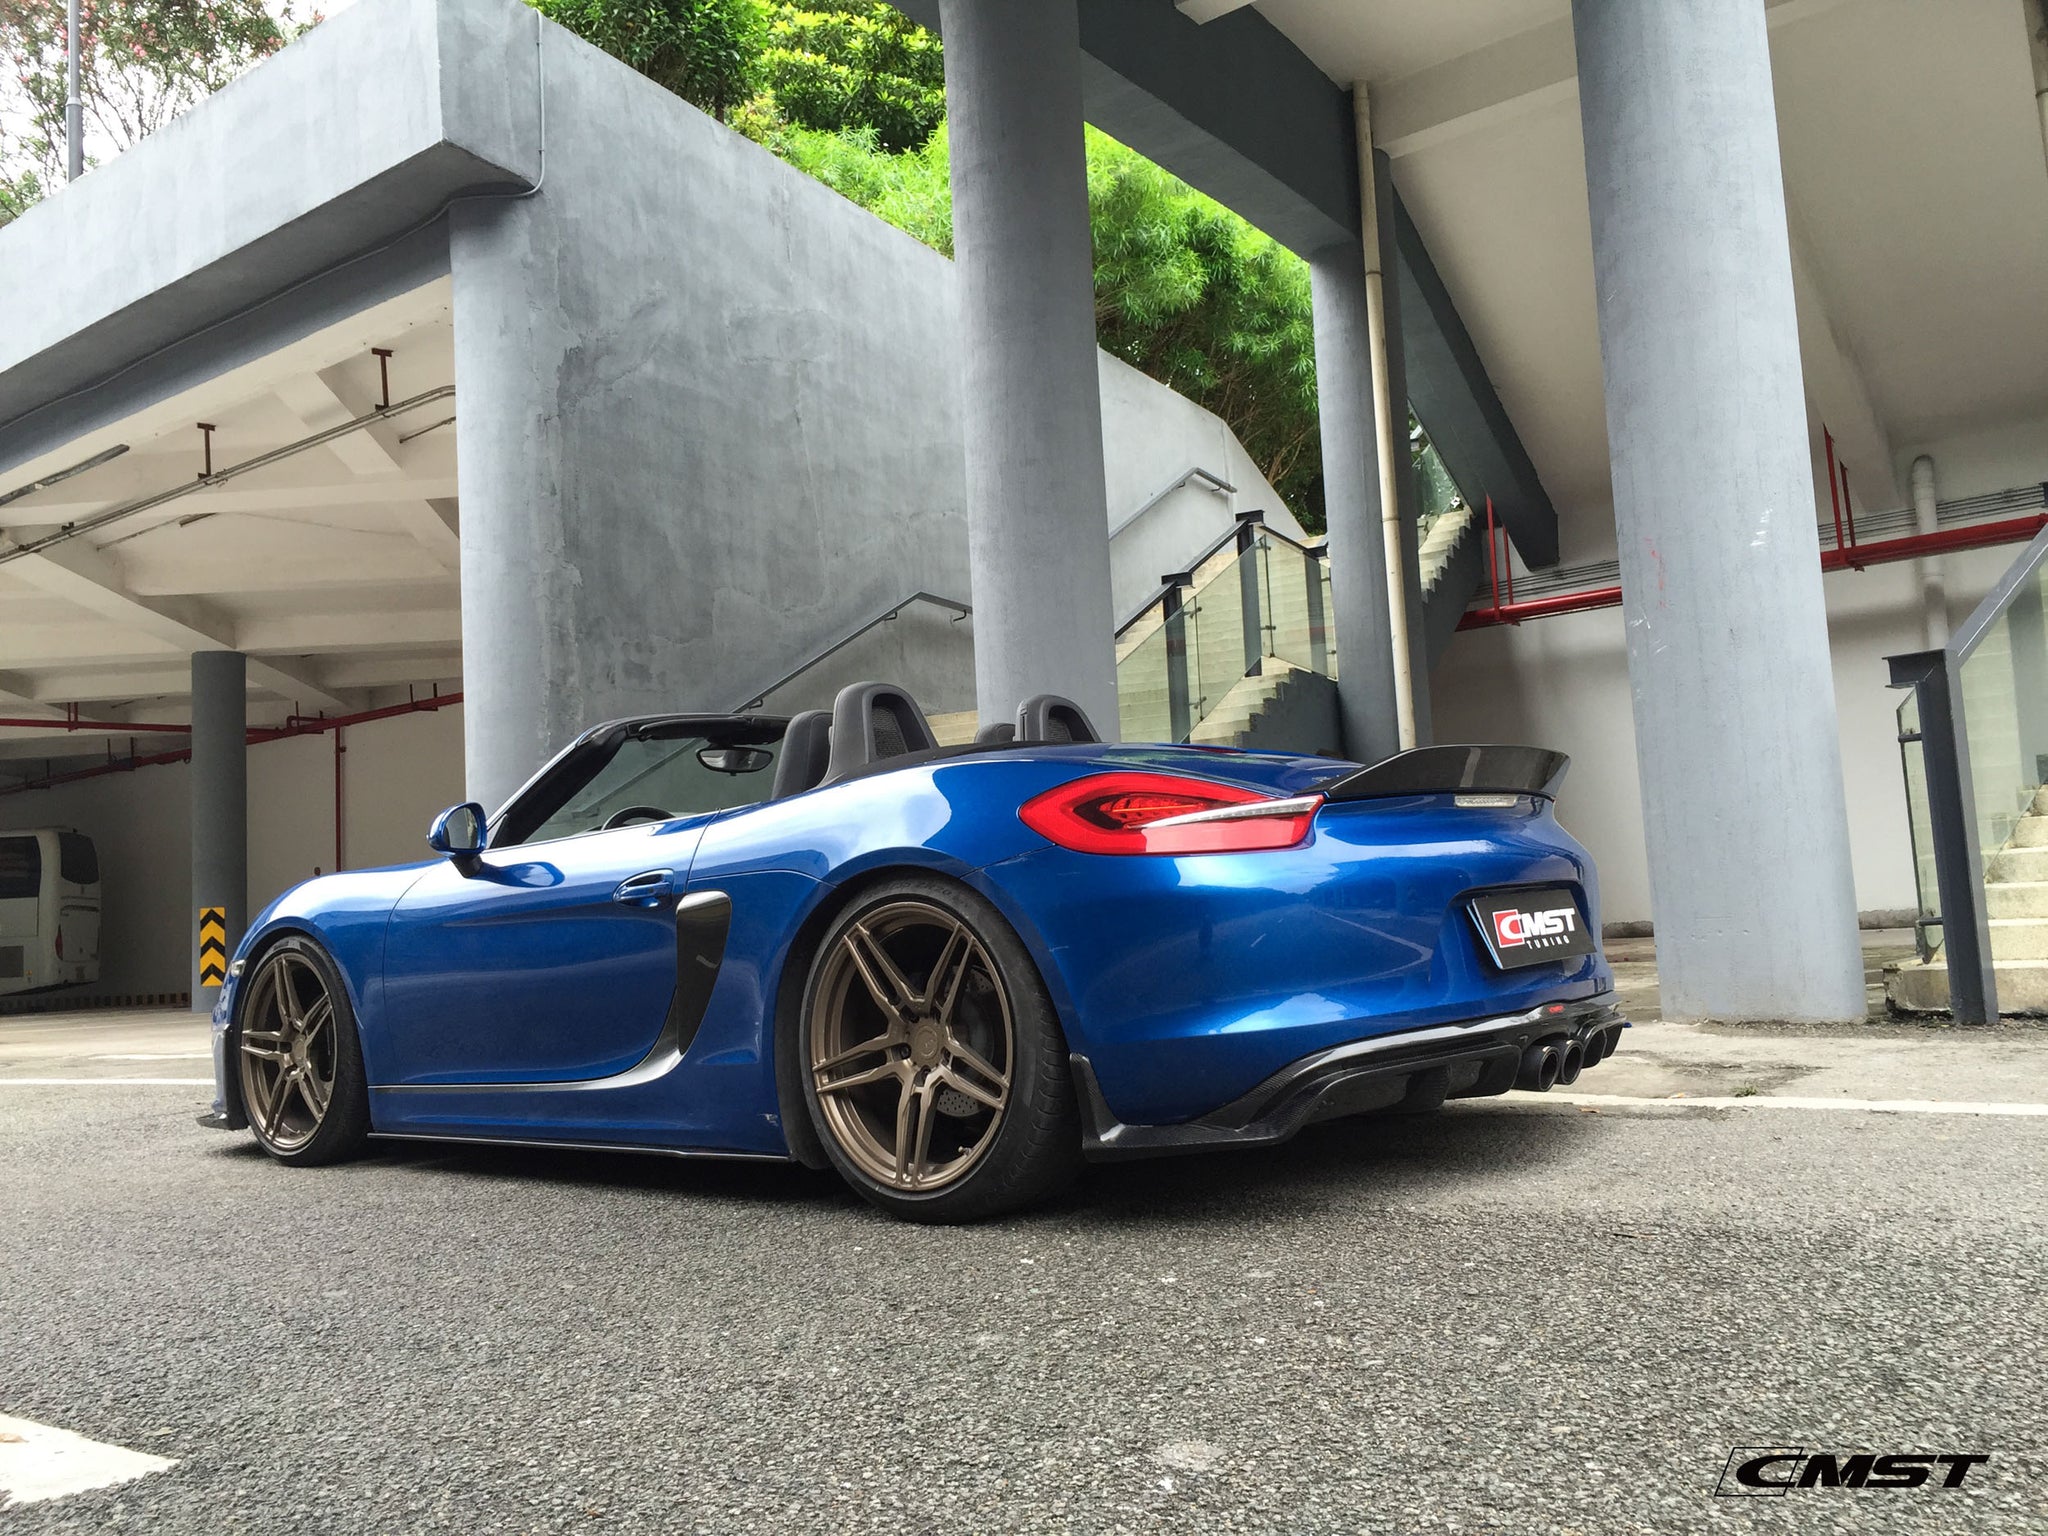 Check our price and buy CMST Carbon Fiber Body Kit set Style for Porsche Cayman/Boxster 981